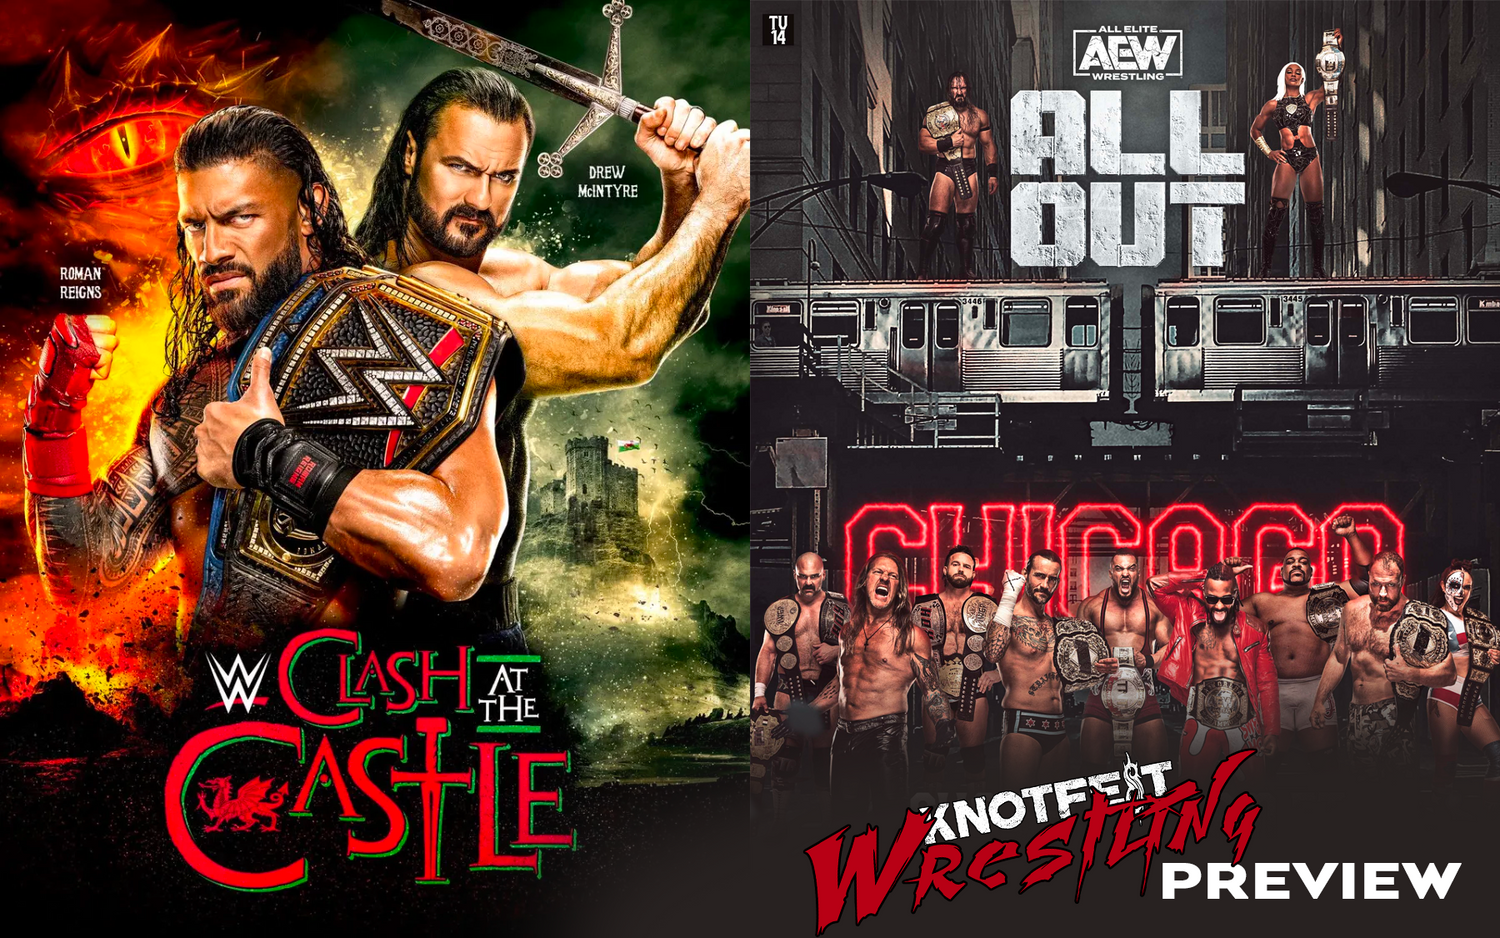 WWE Clash at the Castle &amp; AEW All Out Previews &amp; Predictions Heading Into a Big Wrestling Weekend